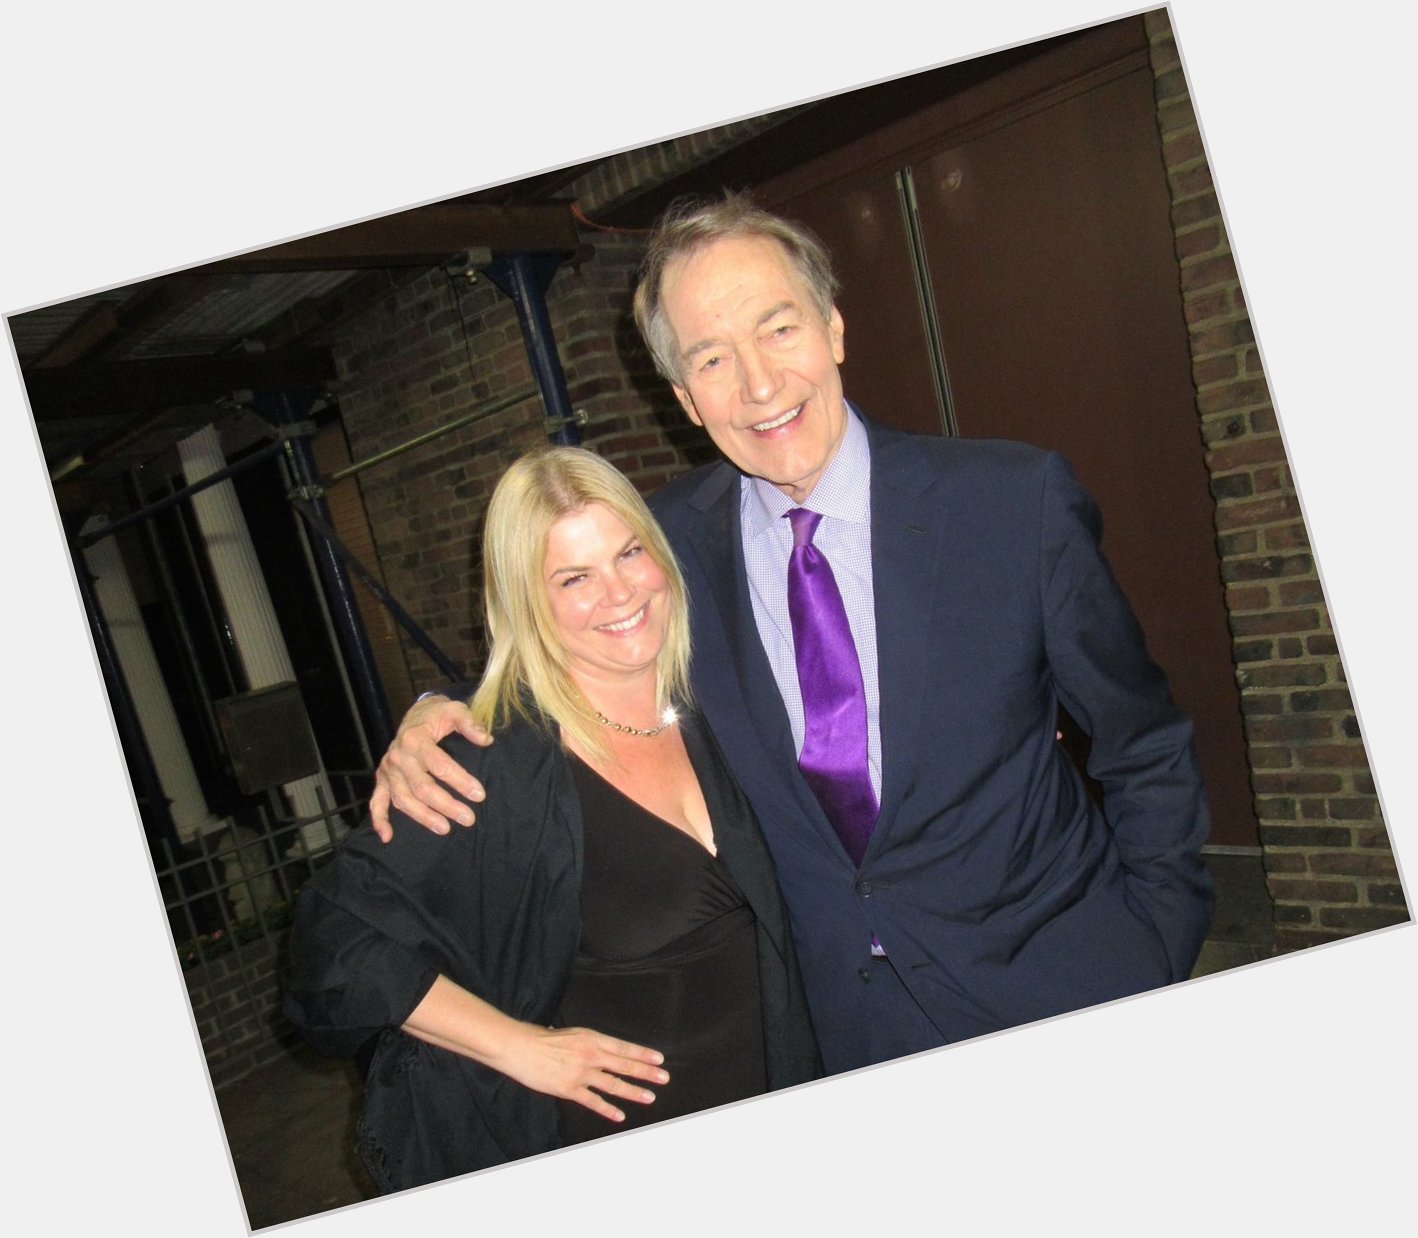 Happy Birthday to the fiercely intelligent and inquisitive host of the self-titled interview show... Charlie Rose! 